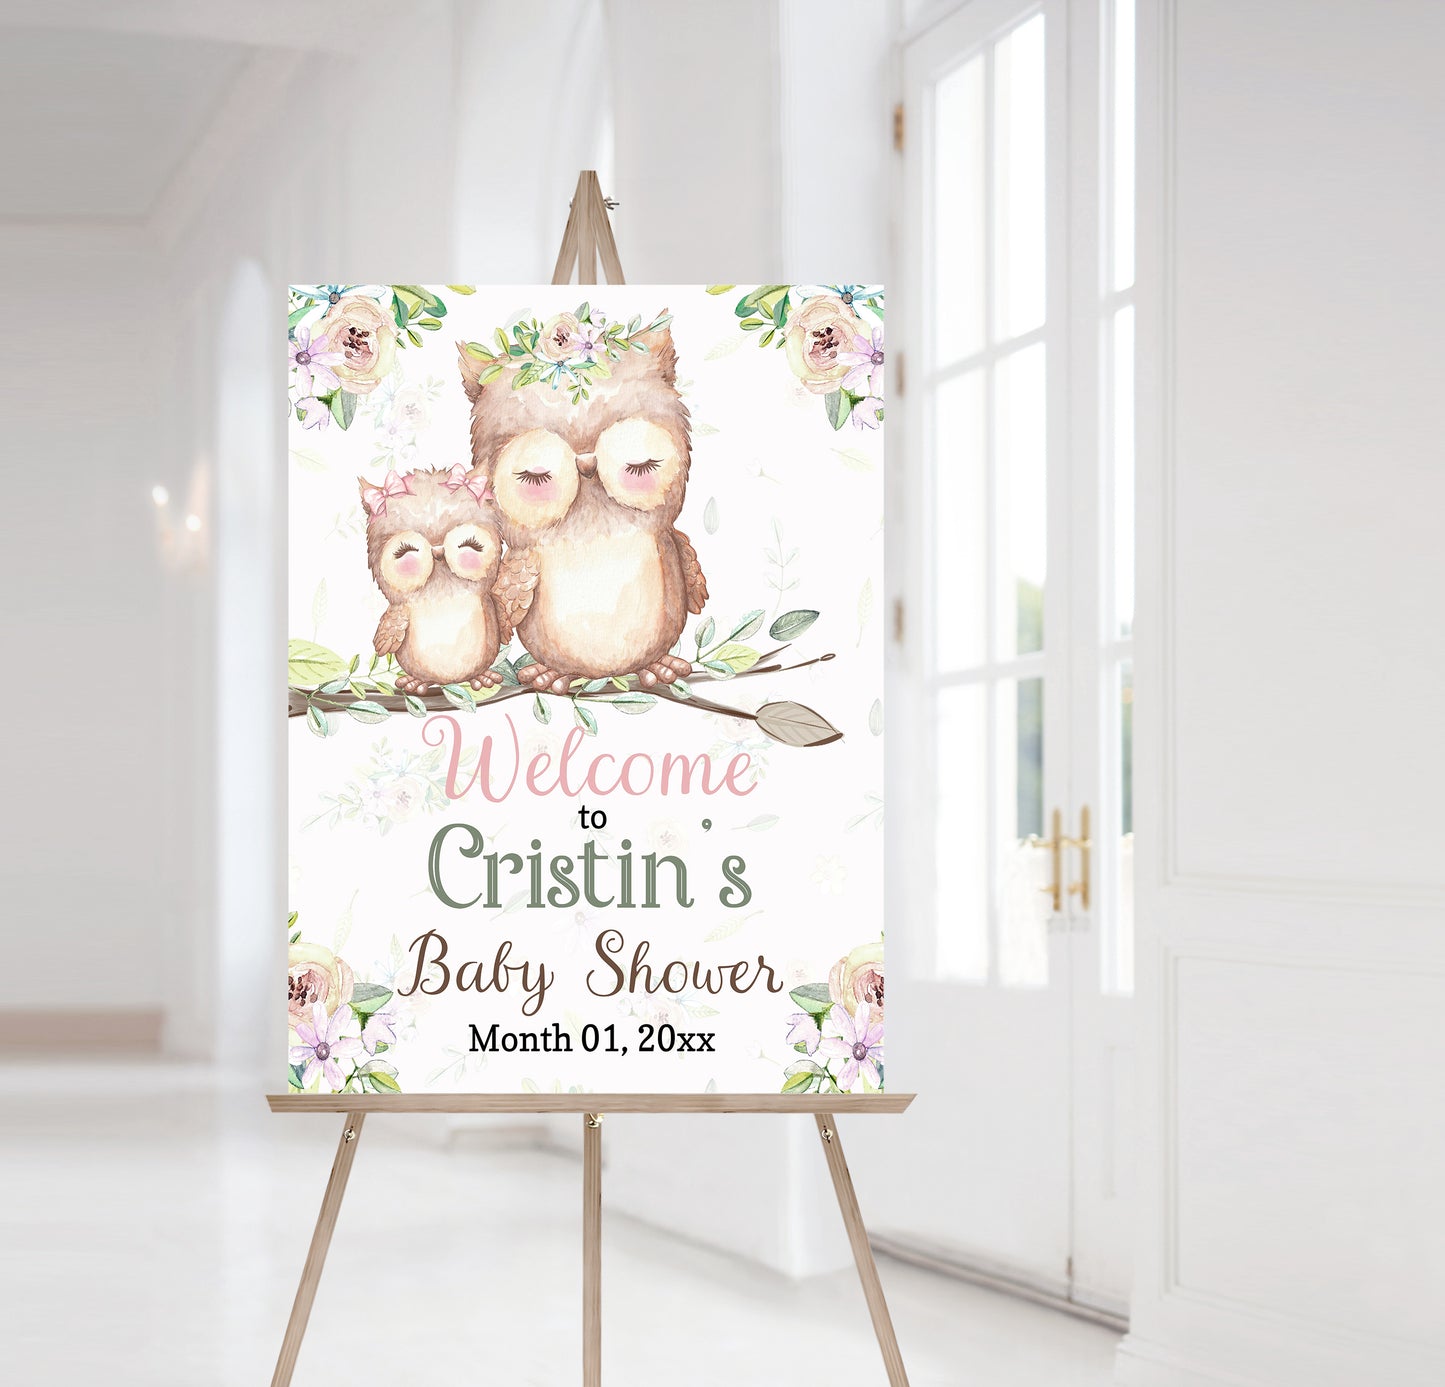 Editable Owl Baby Shower Welcome Sign | Owl theme shower decorations - 78A